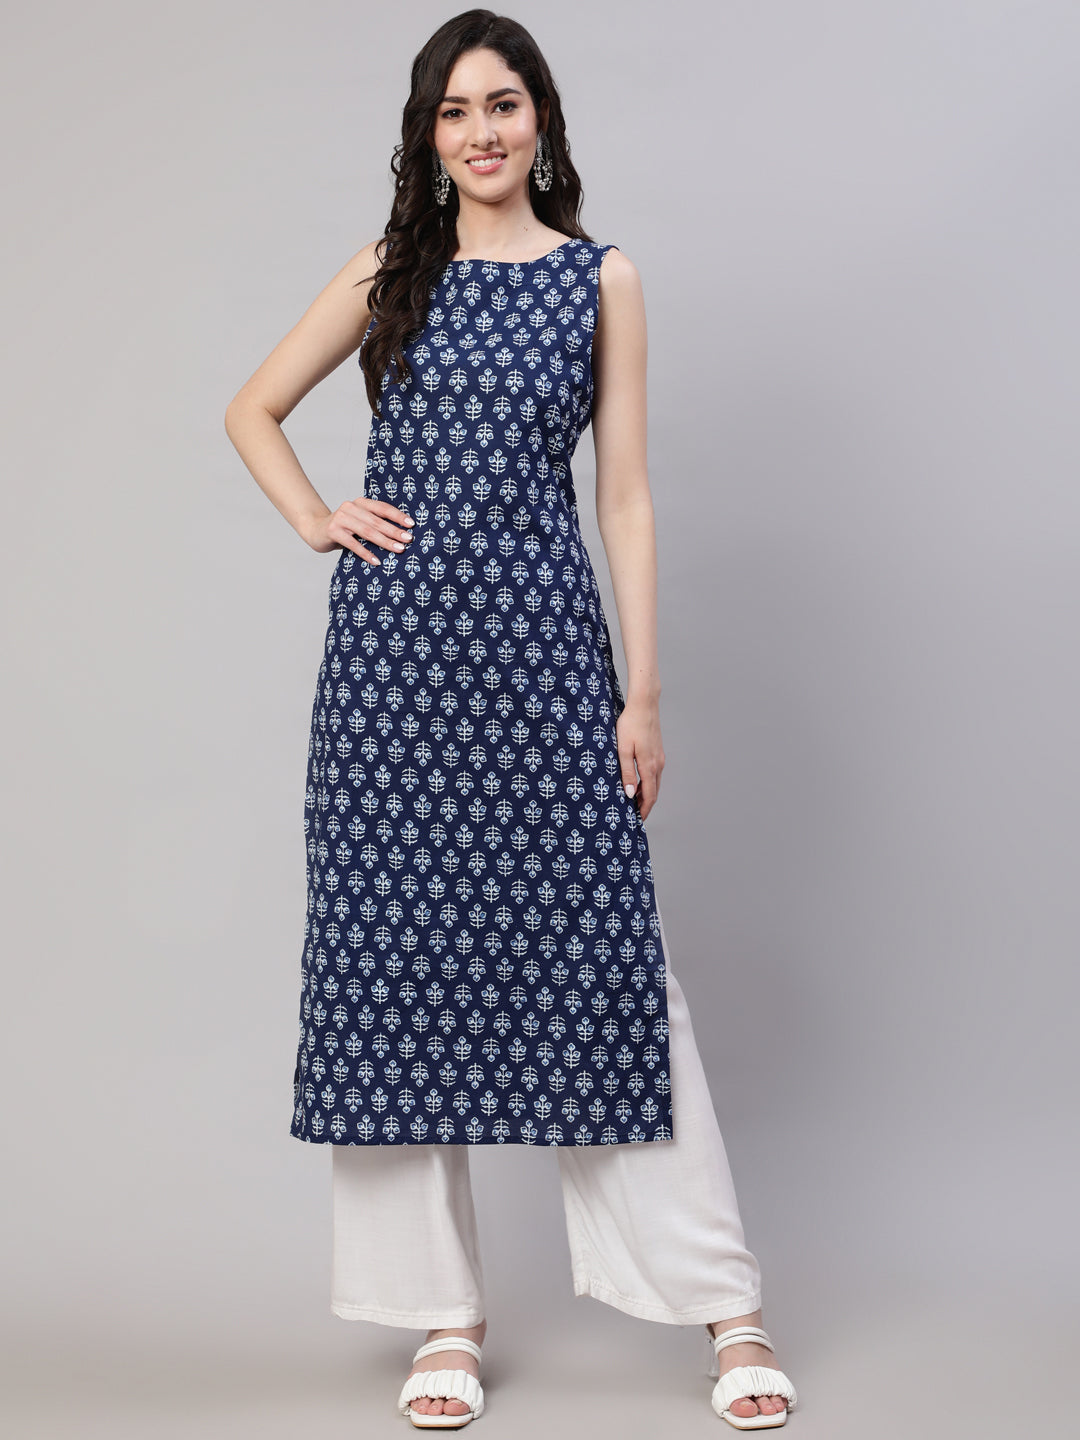 Turn Heads This Season With These Modern Kurtis For Jeans! Learn To Style  These Ravishing Kurtis With Jeans Properly!